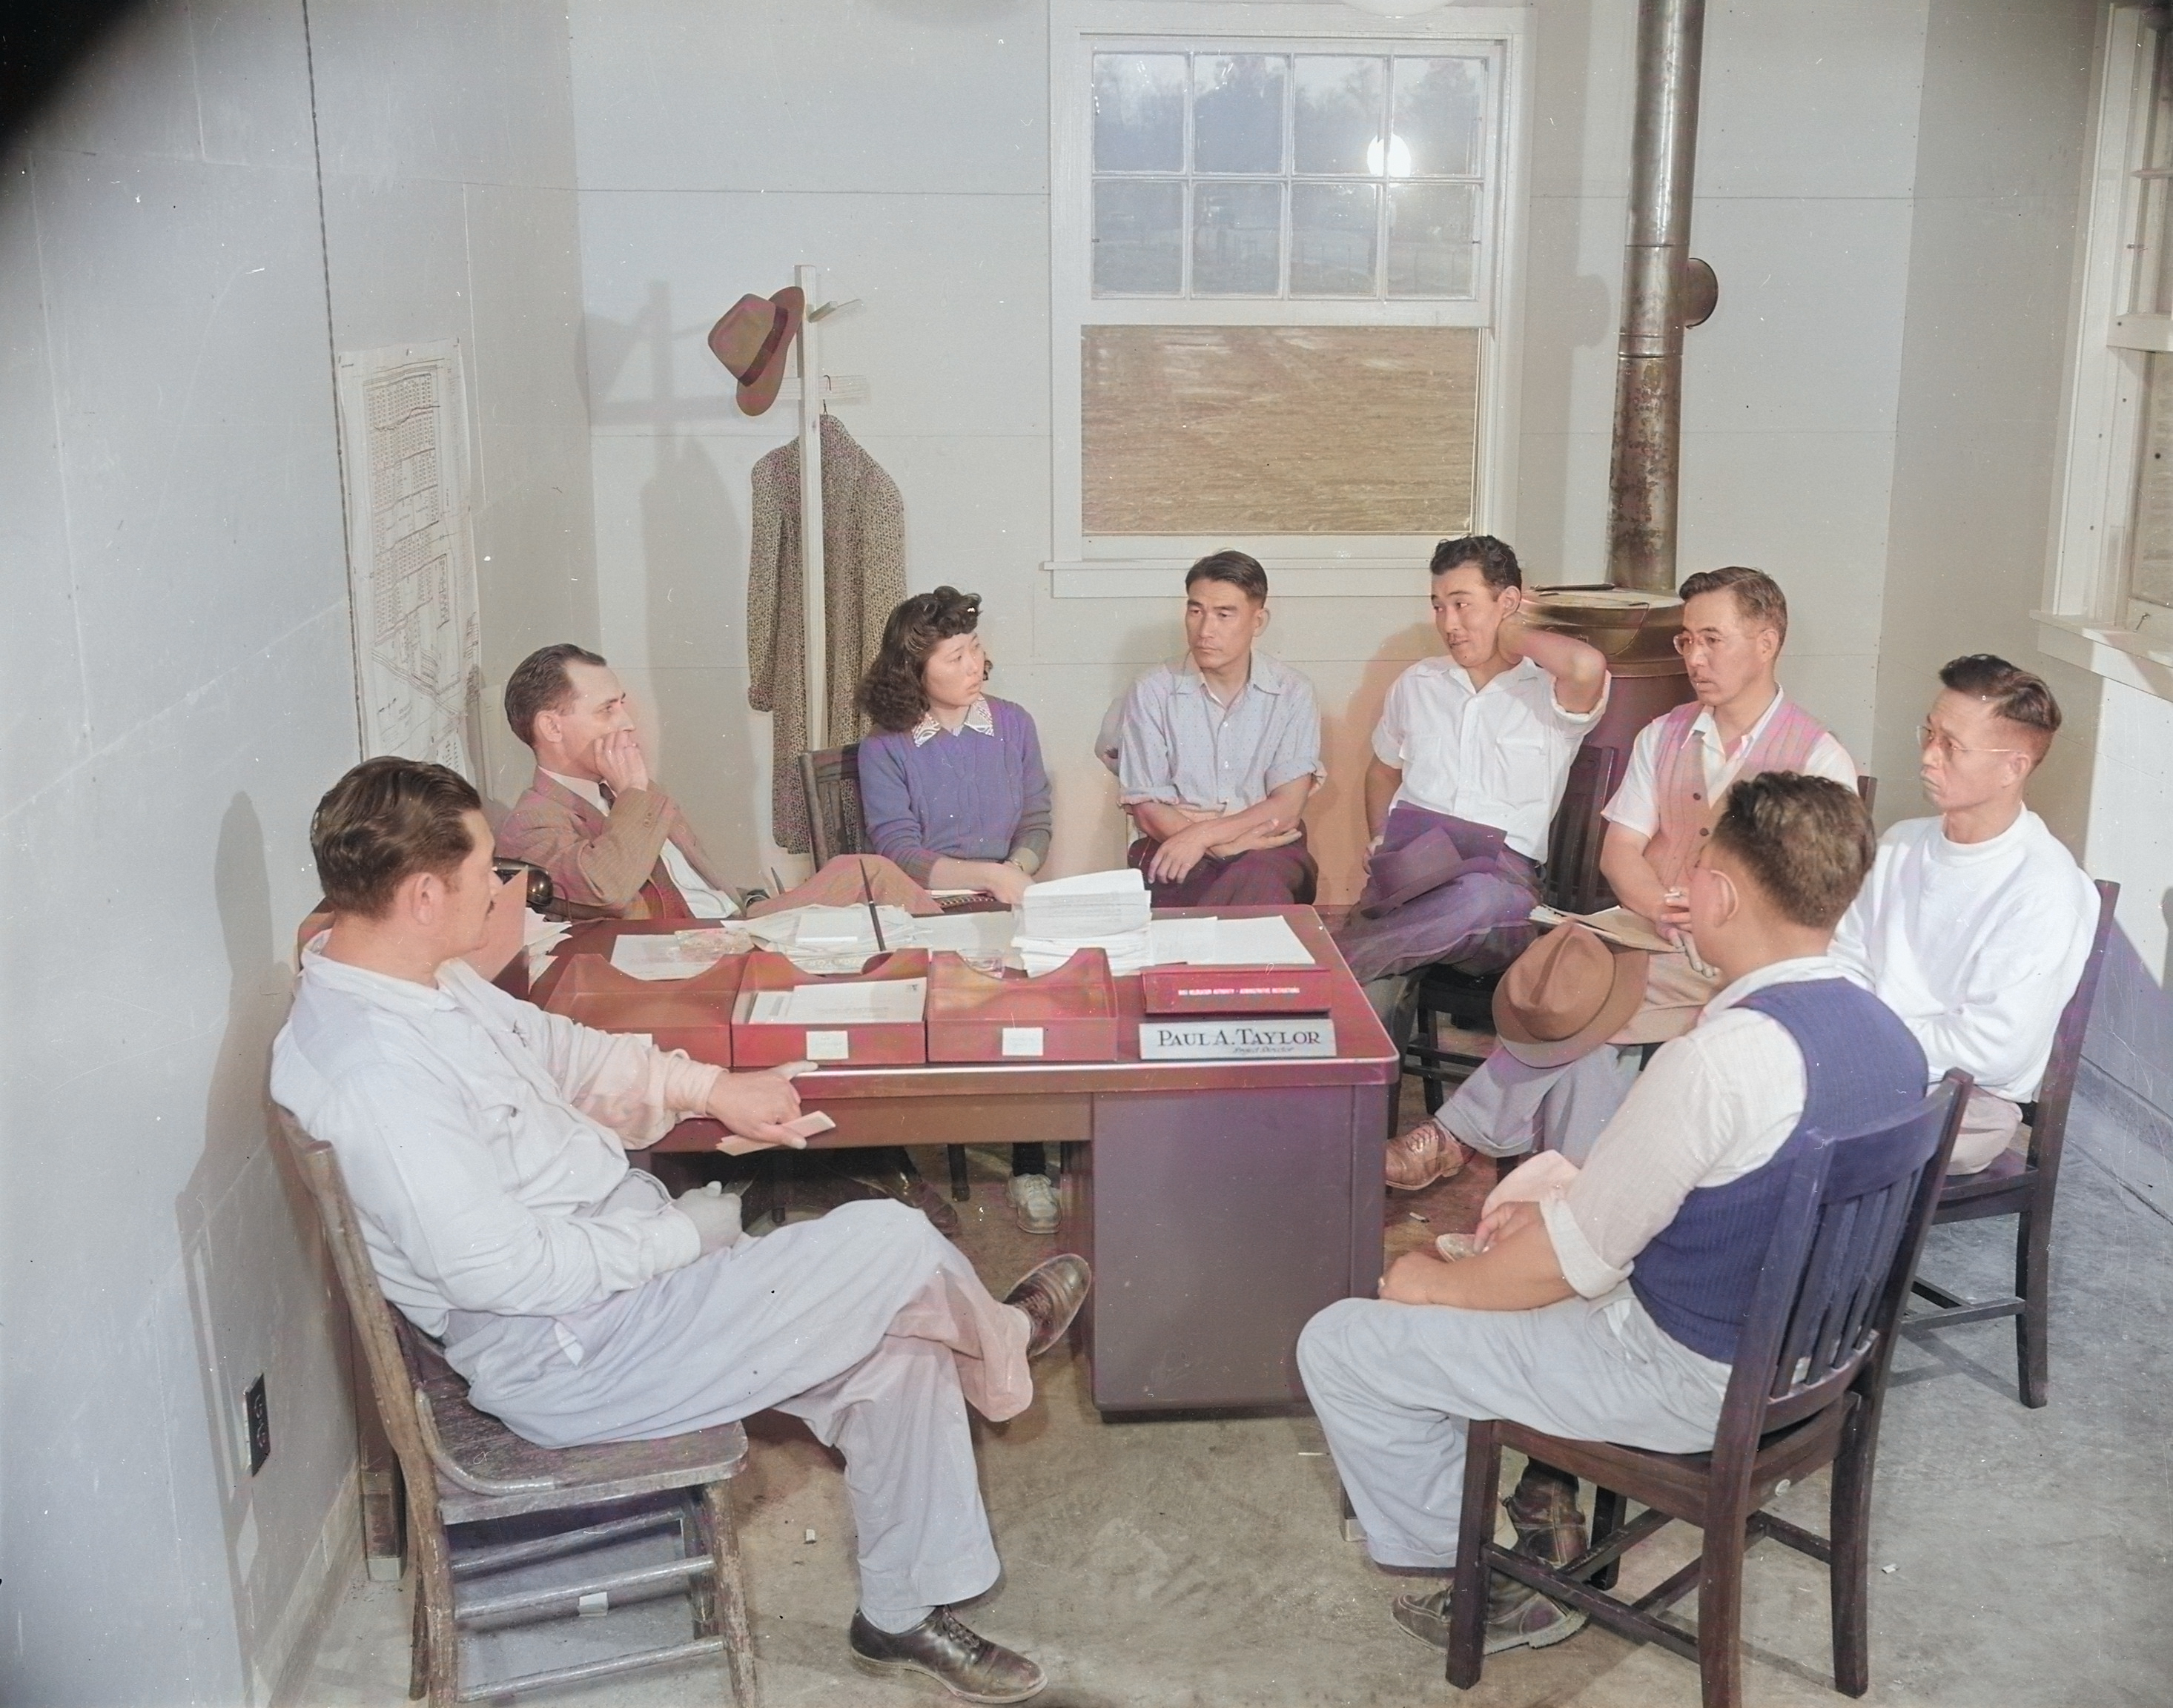 Project Director Paul Taylor speaking with the Council Committee of Jerome War Relocation Center, Arkansas, United States, 18 Nov 1942, photo 1 of 2 [Colorized by WW2DB]